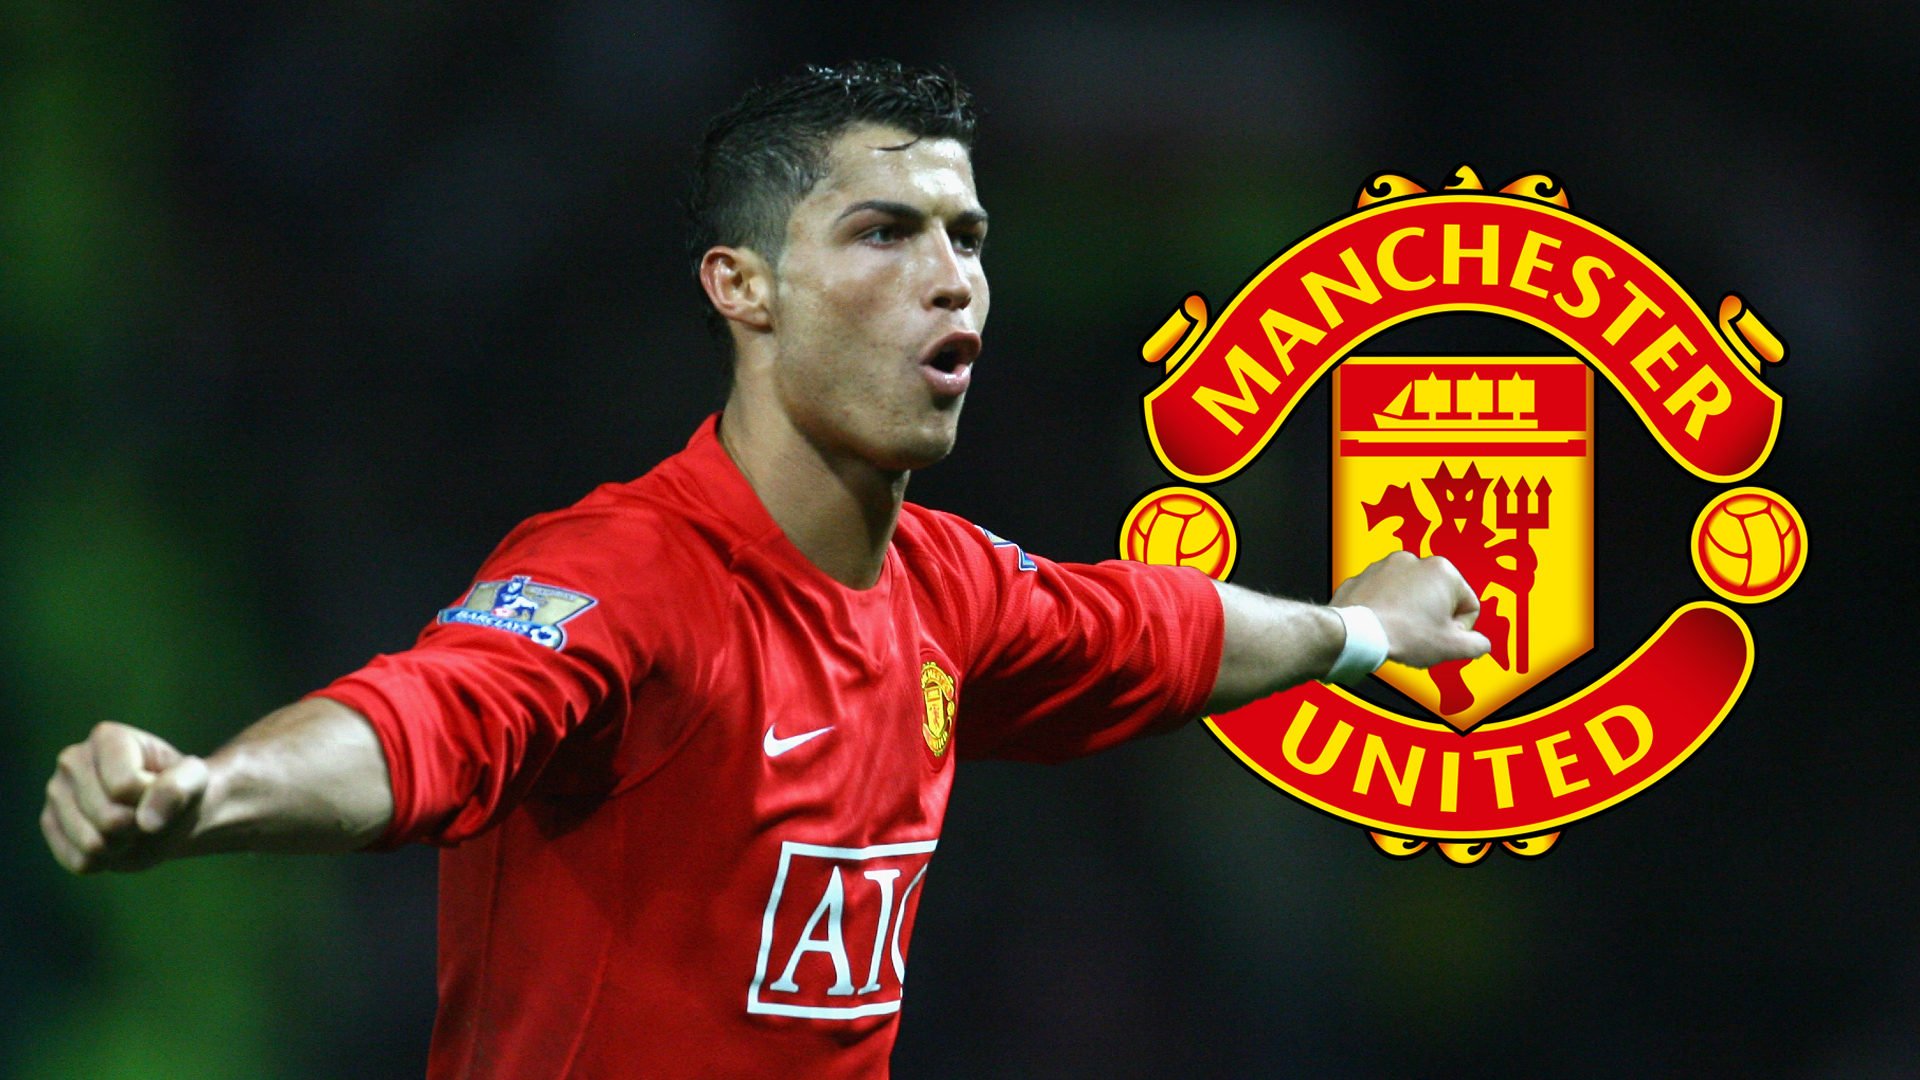 Juventus director reveals why Ronaldo joined Man Utd rather than Man City